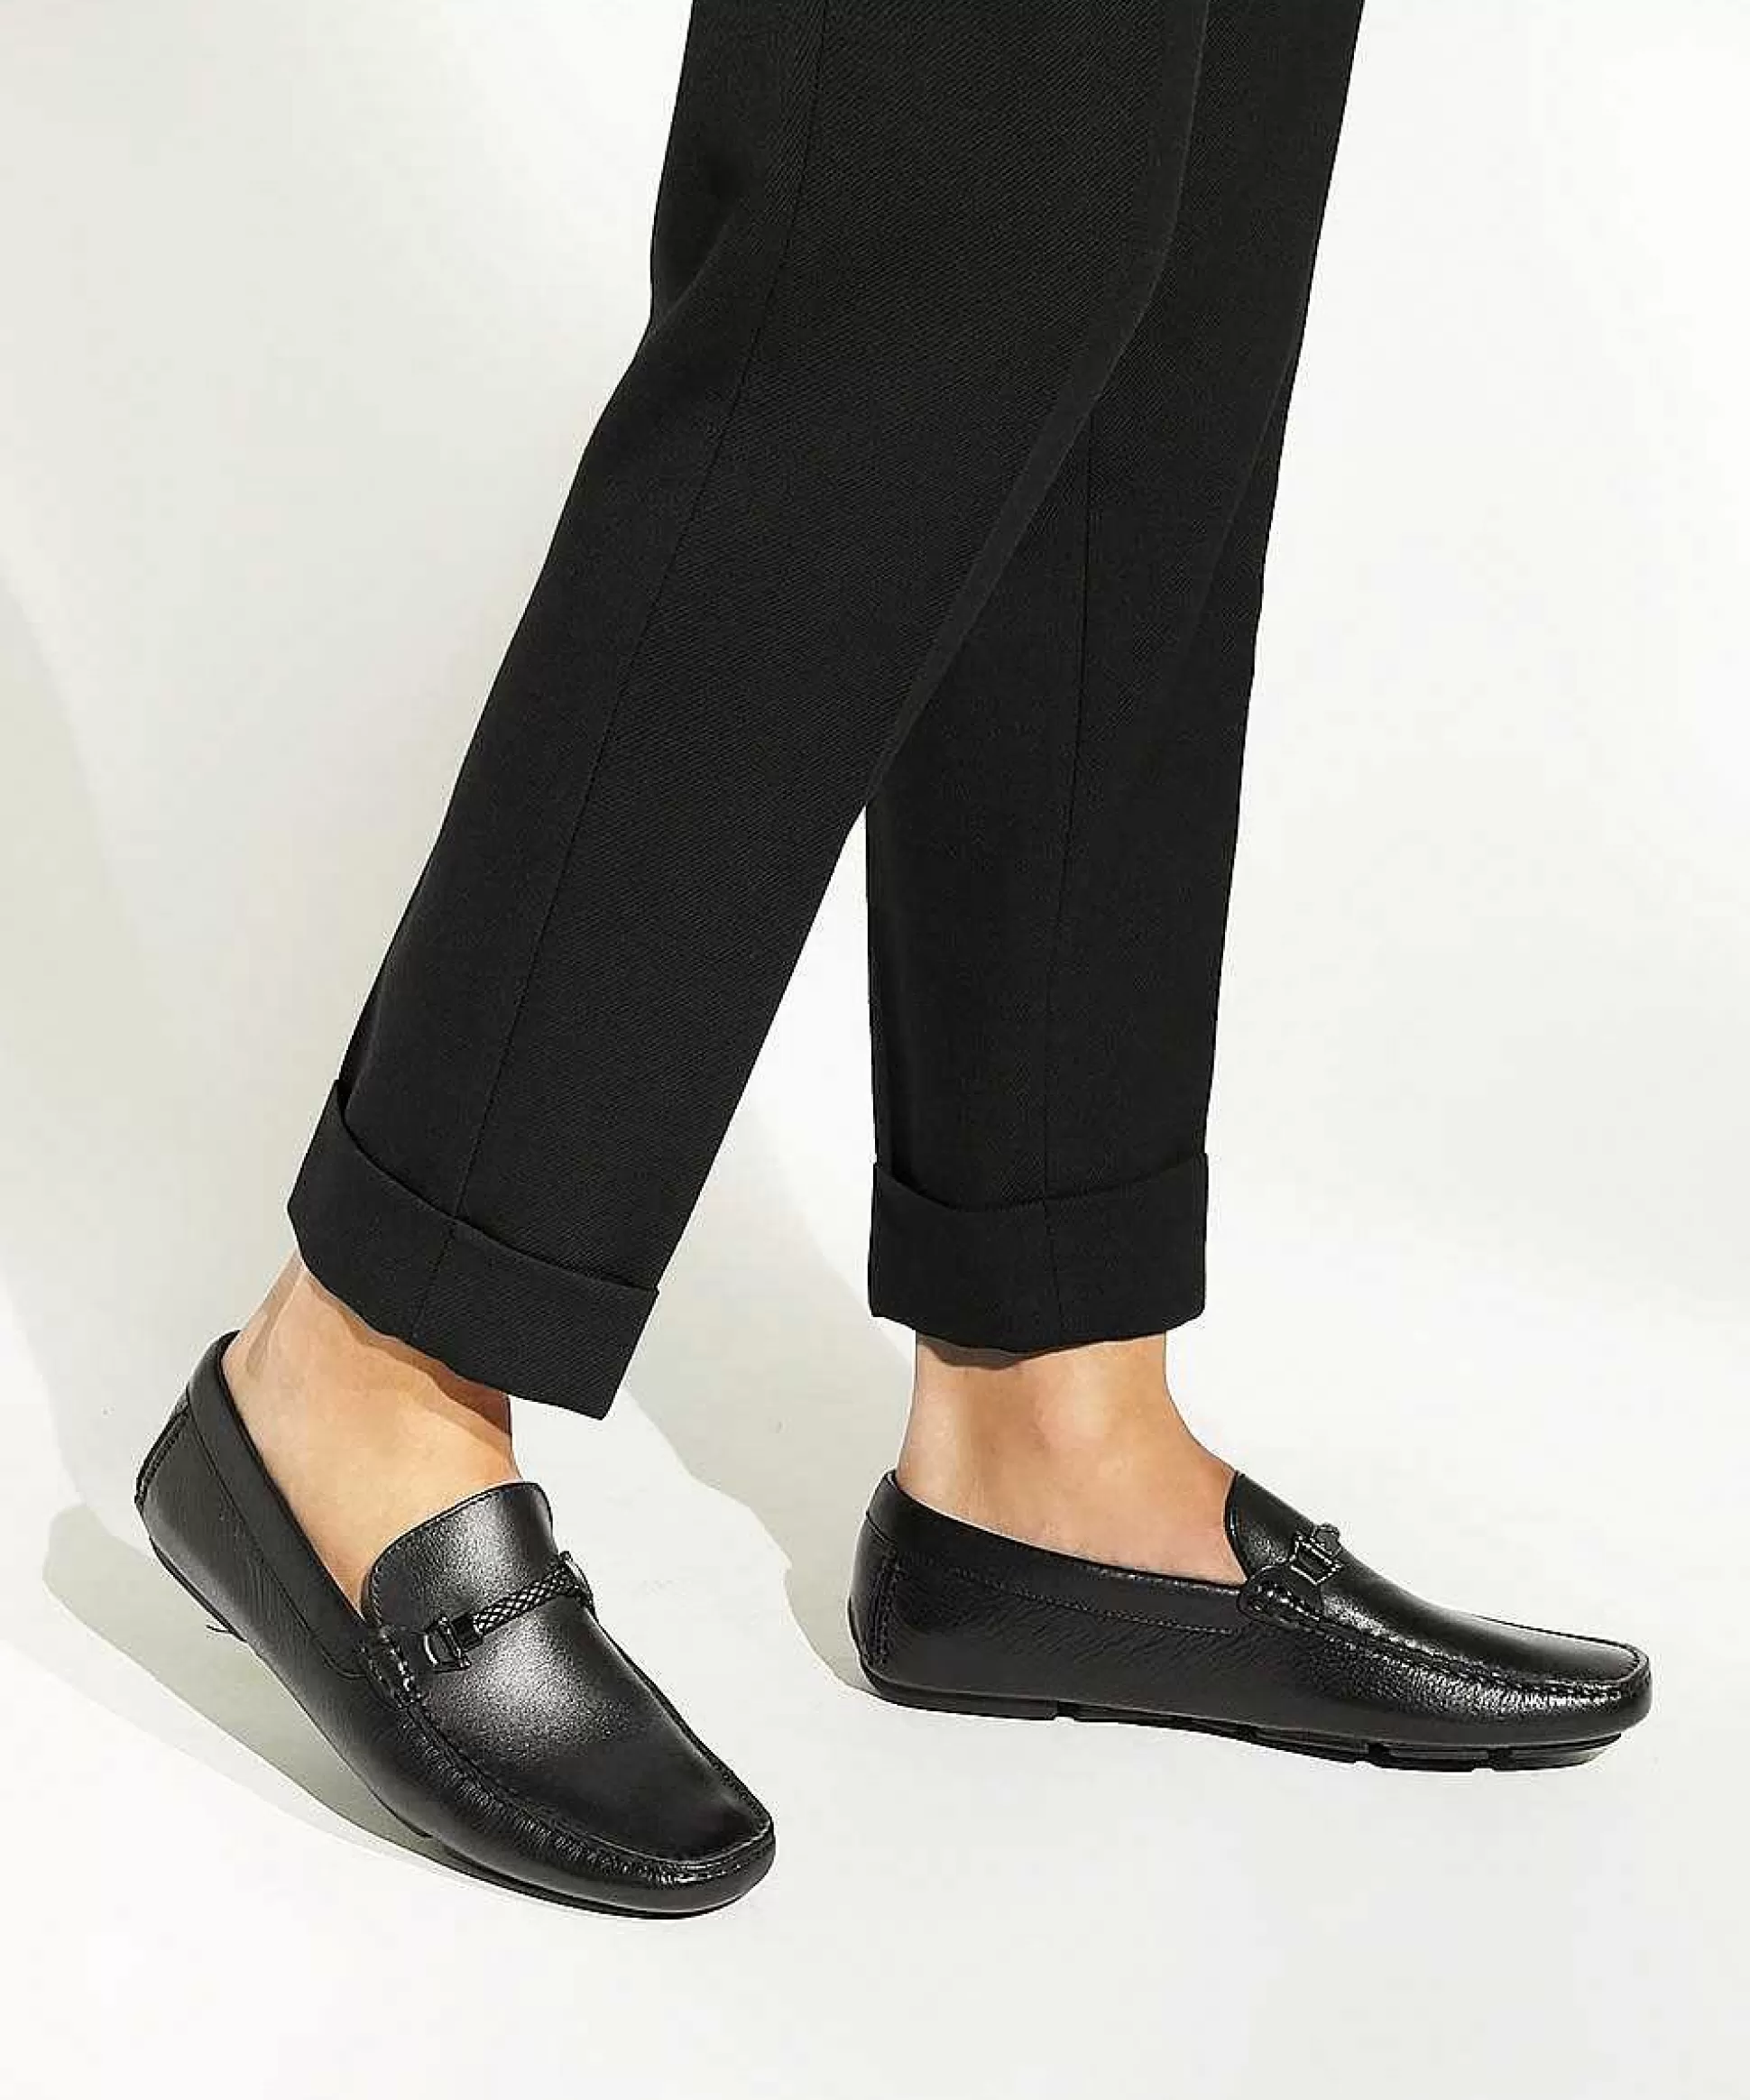 Dune London BEACONS - BLACK-Men Casual Shoes | Loafers